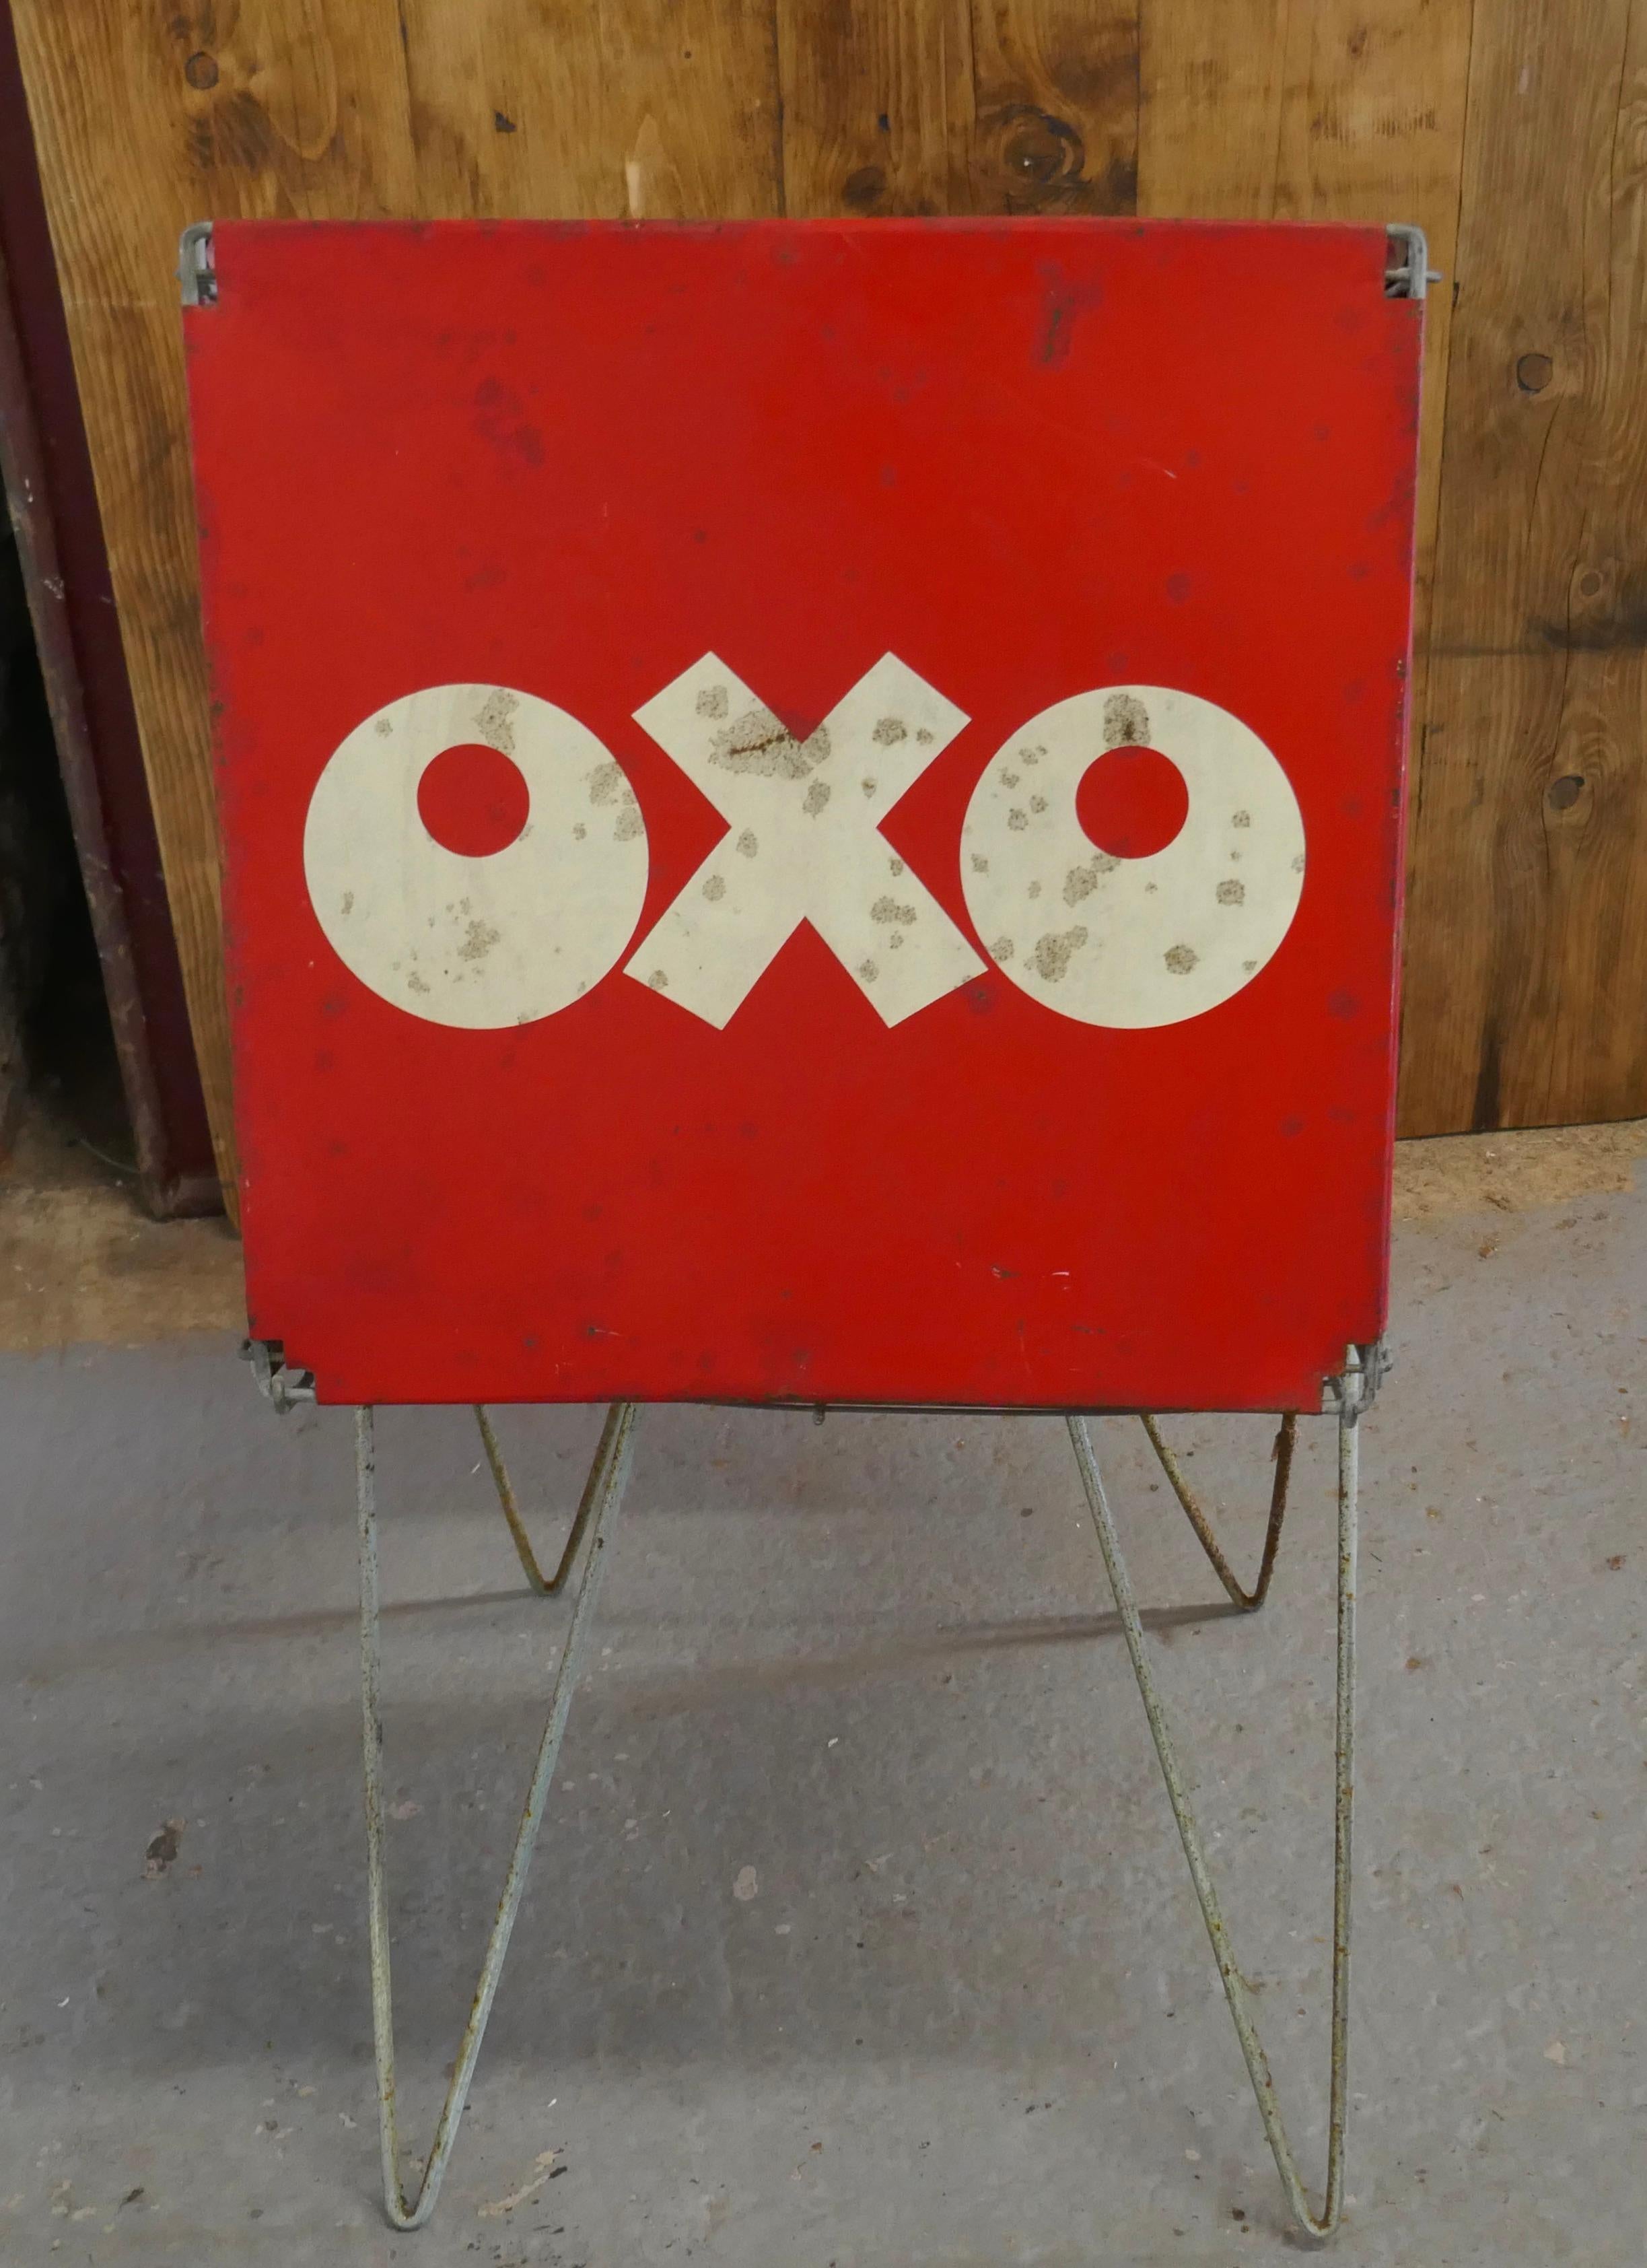 Oxo cube tin shop display dispenser

A great piece from the grocer shop display, the stand is metal with a giant Tin Plate box to display and sell packets of OXO
In used condition but sound

The stand is 35” high, 17”x 18”
TAC49.